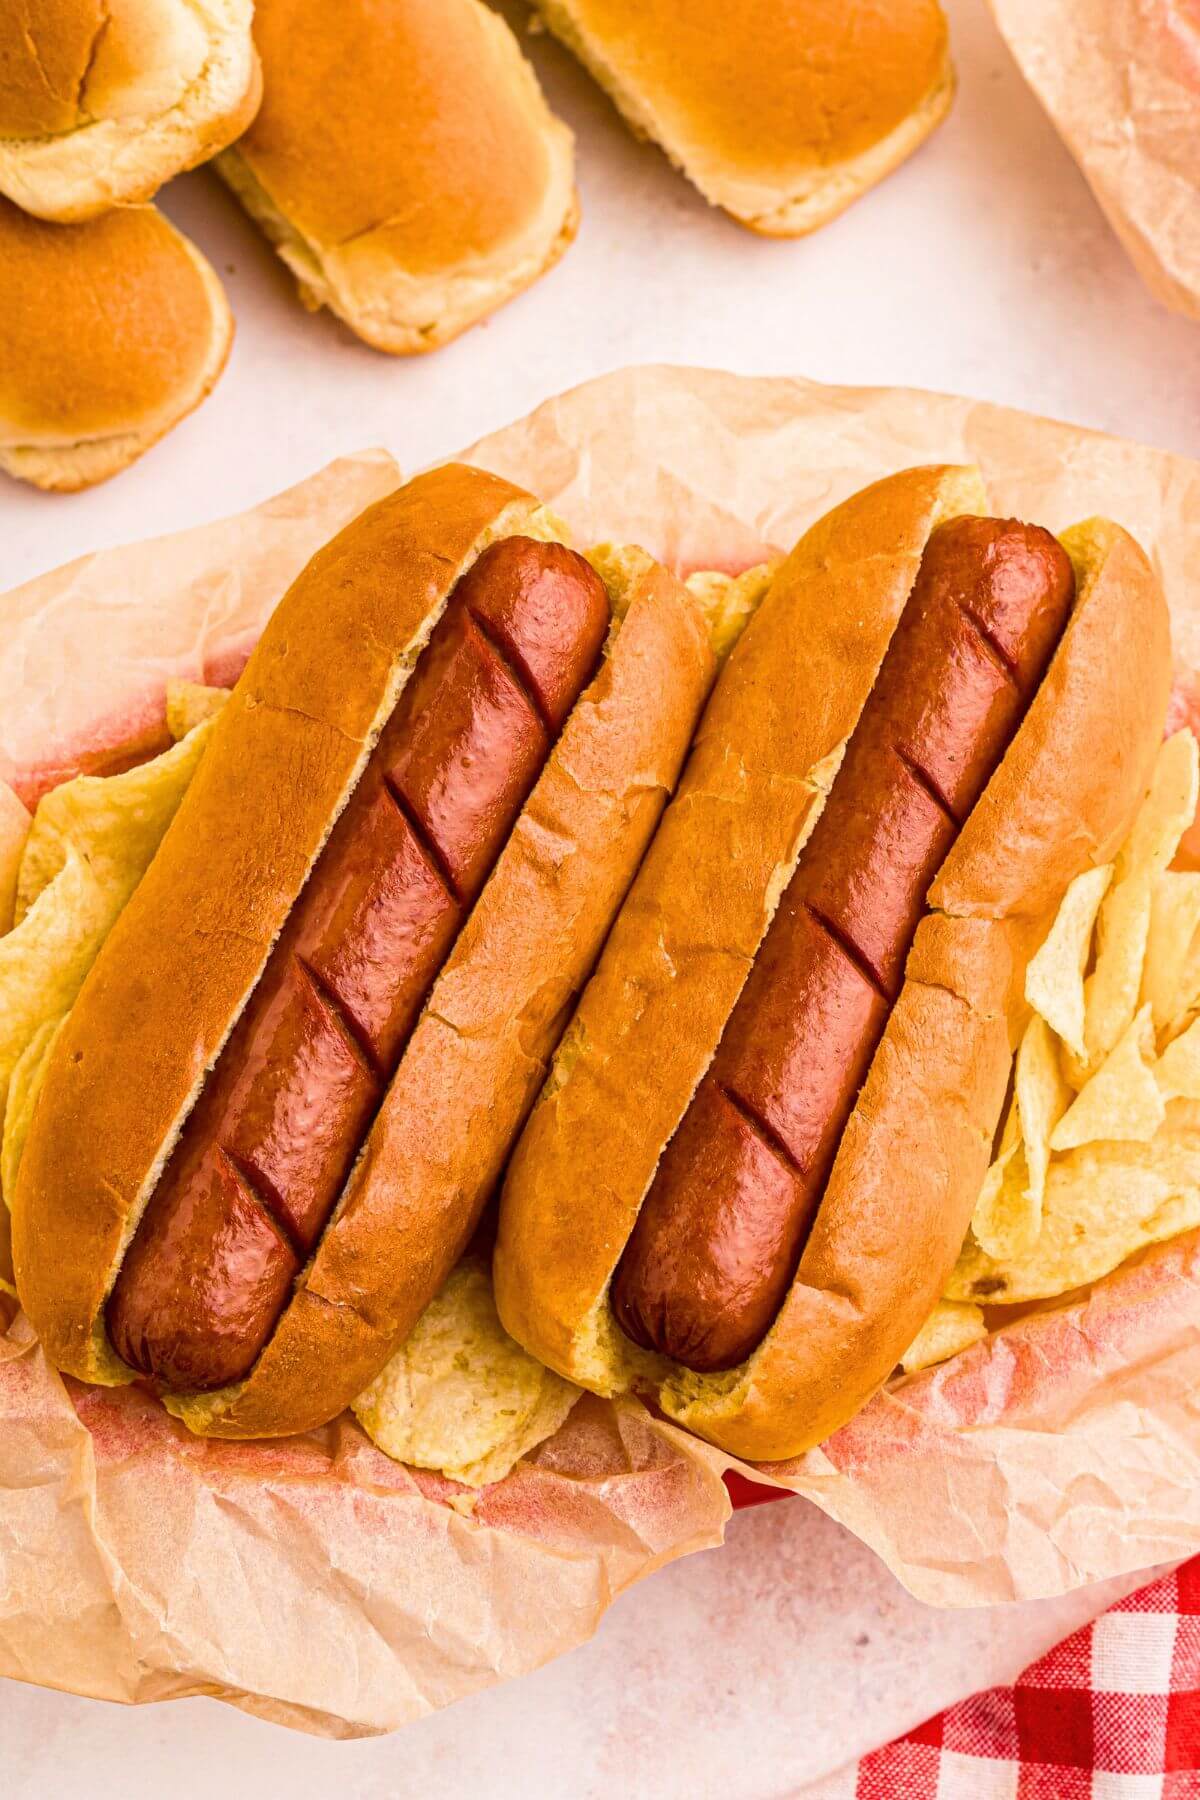 Golden juicy hot dogs in buns, with potato chips next to them. 